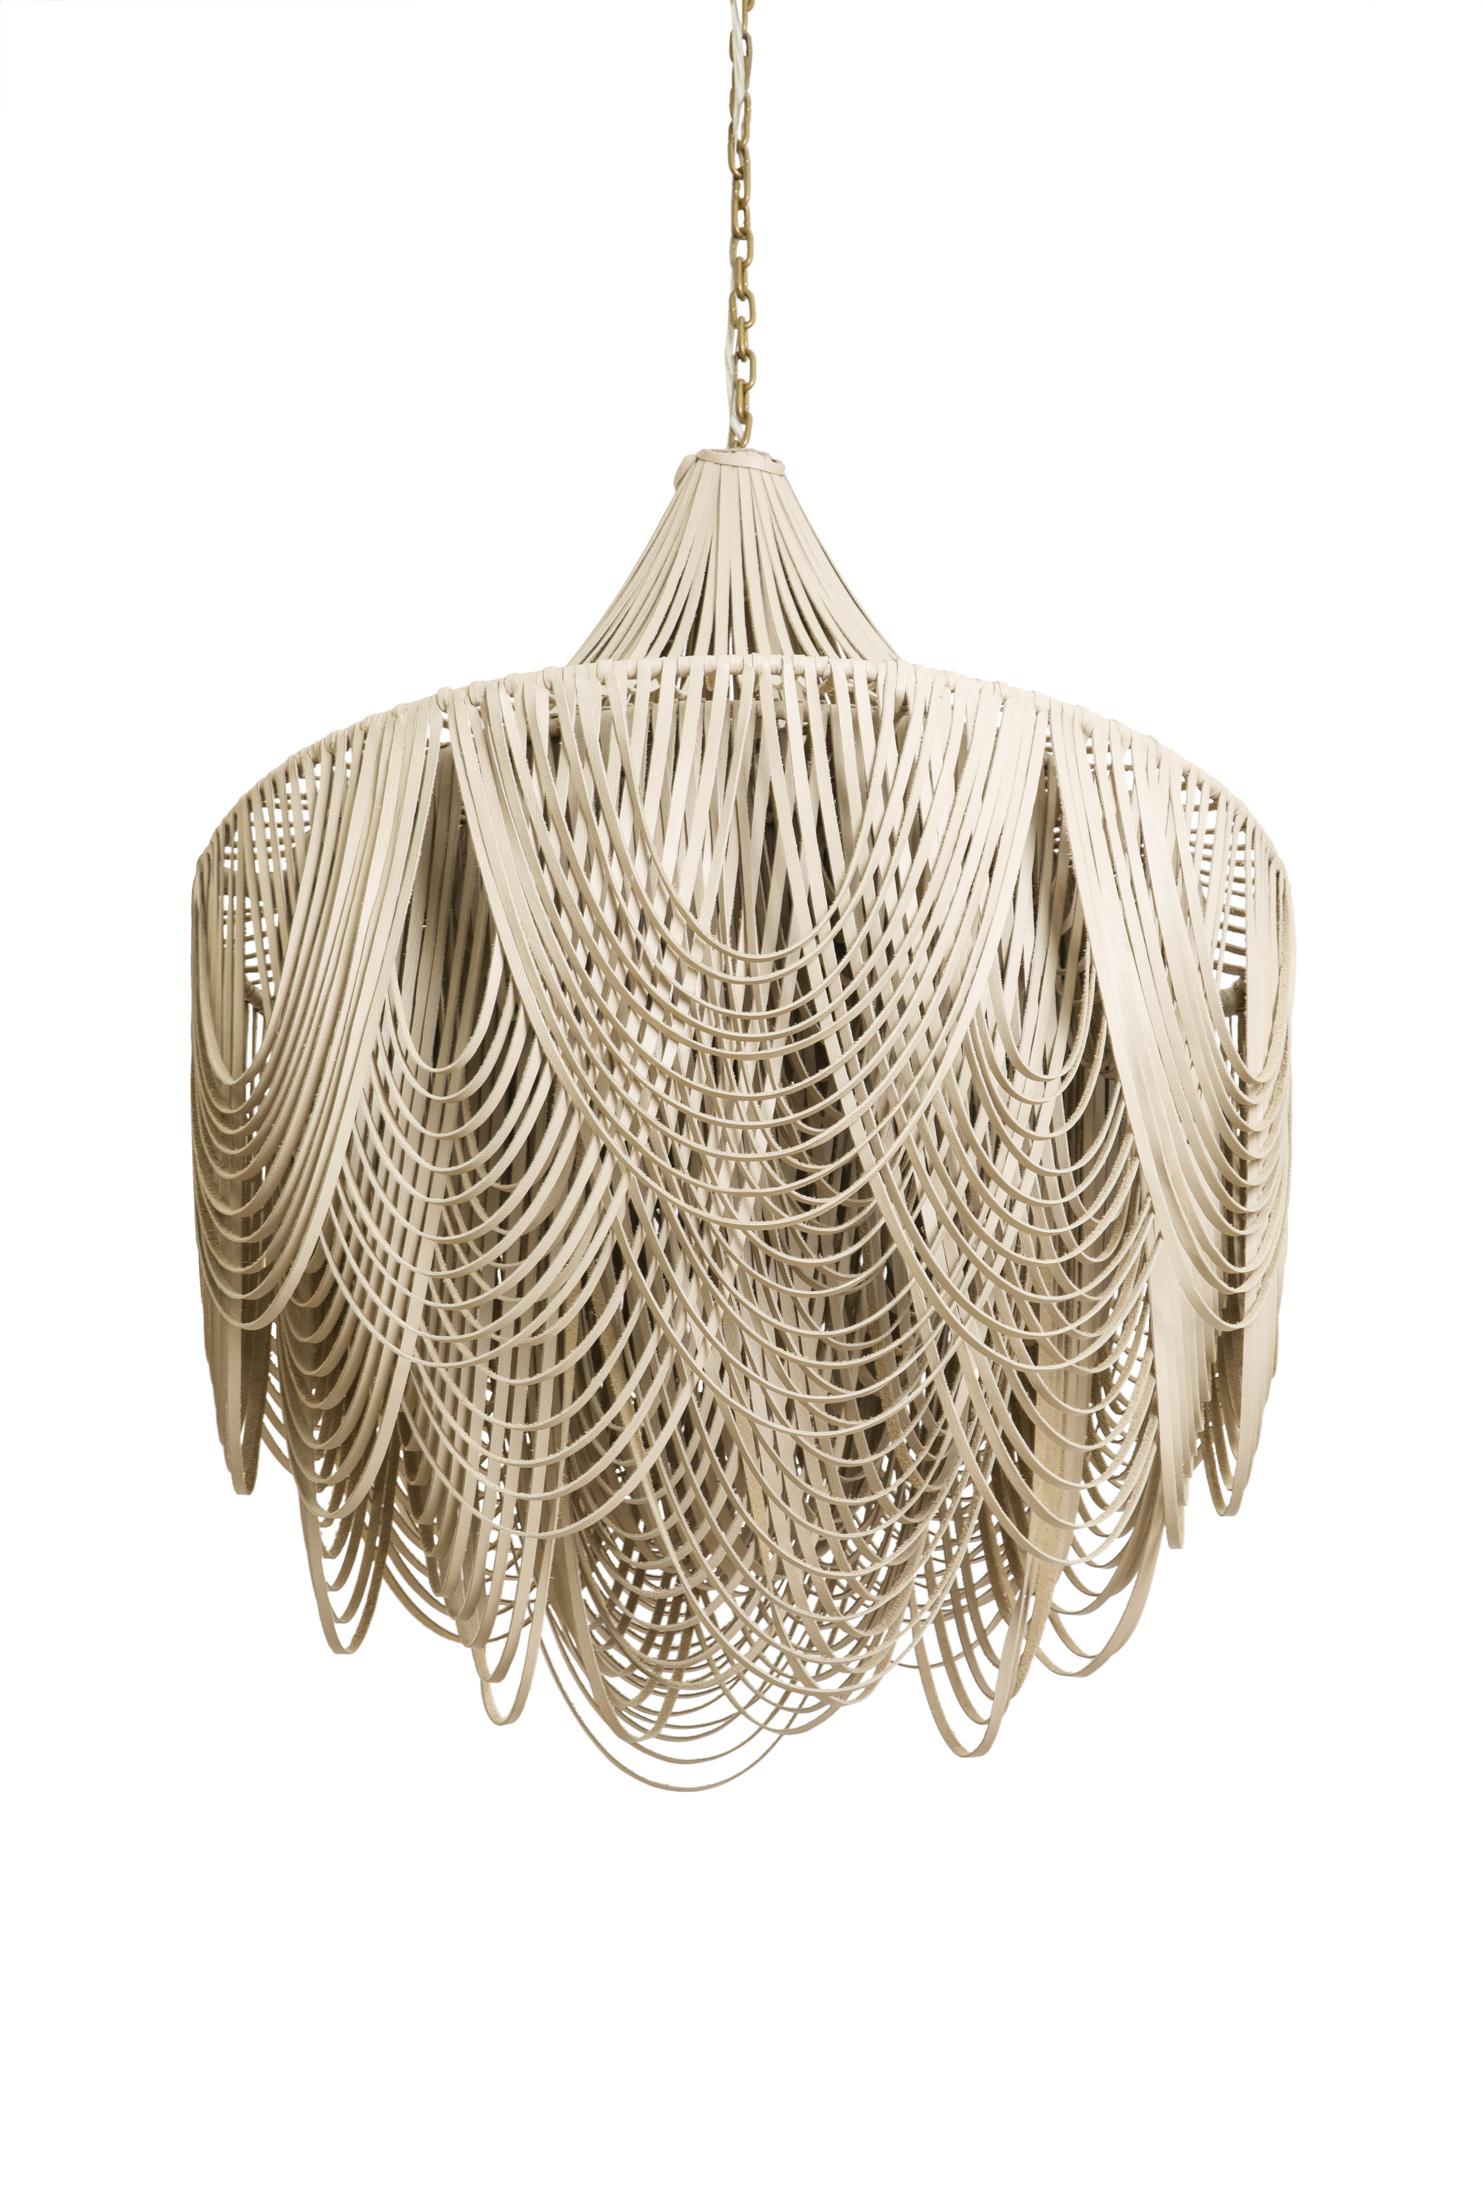 Medium Round Whisper with Crown Leather Chandelier in Cream-Stone Leather